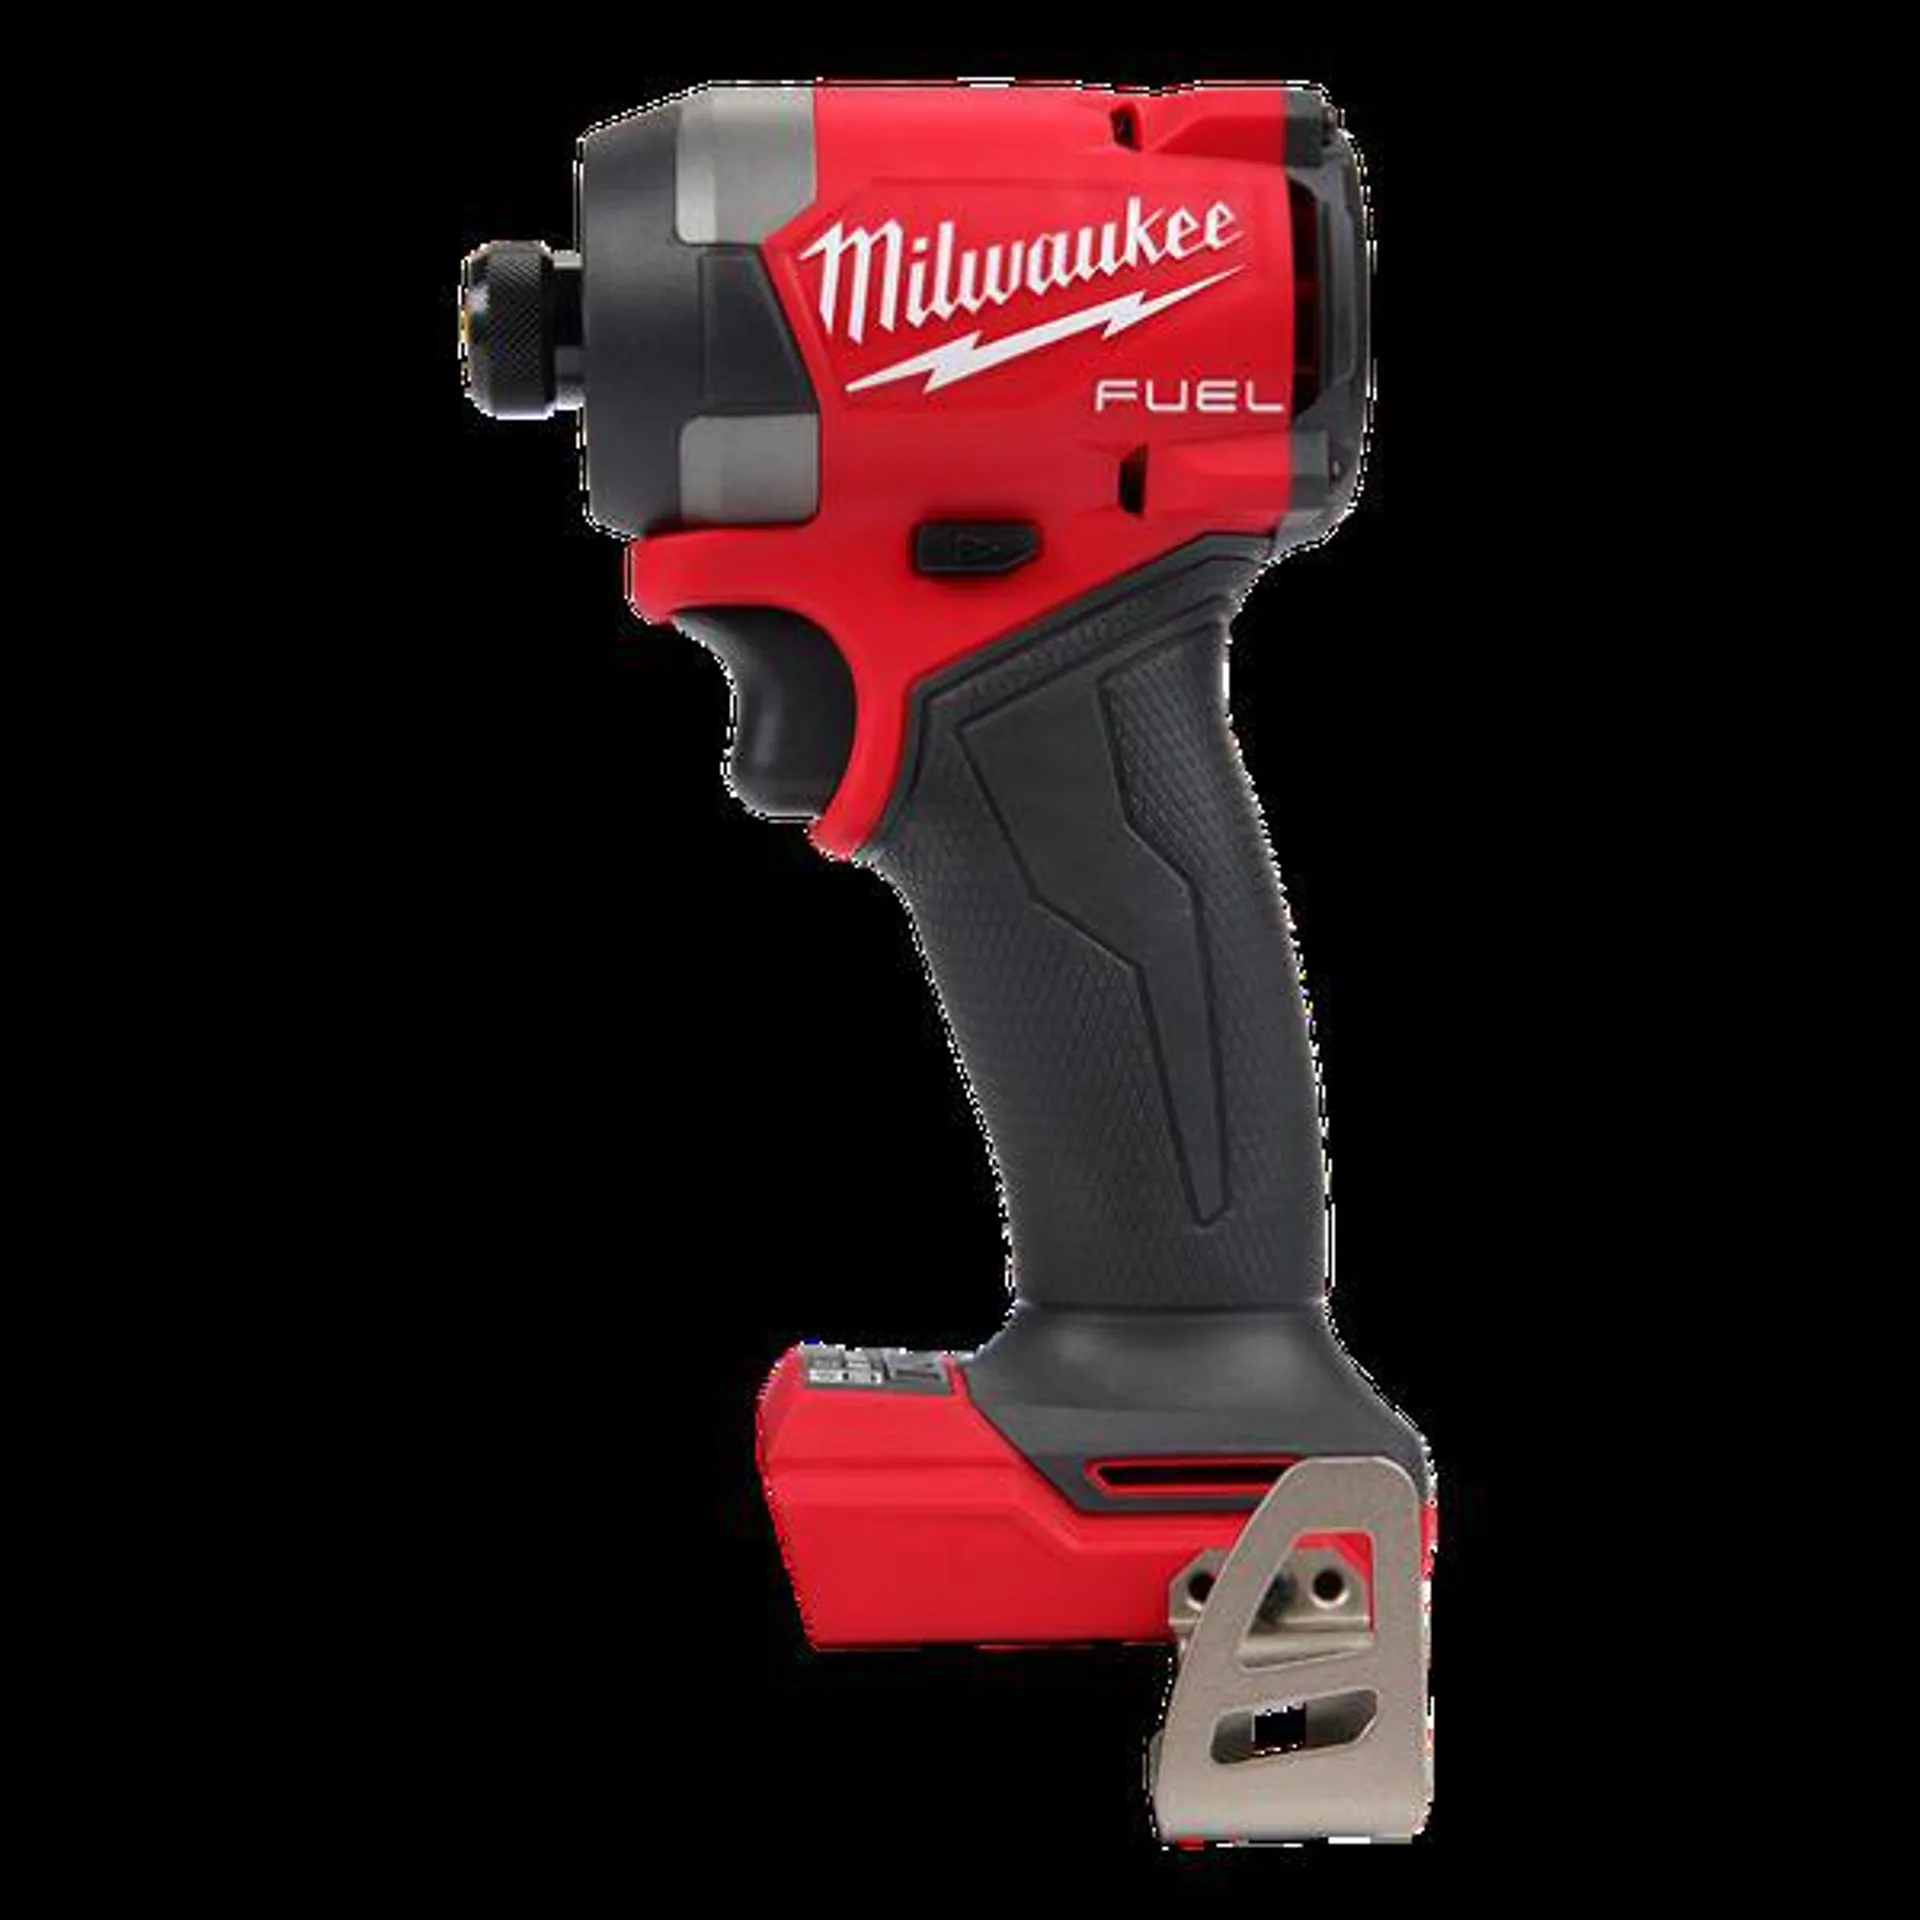 M18 FUEL Hex Impact Driver Gen 4 1/4 Inch Tool Only